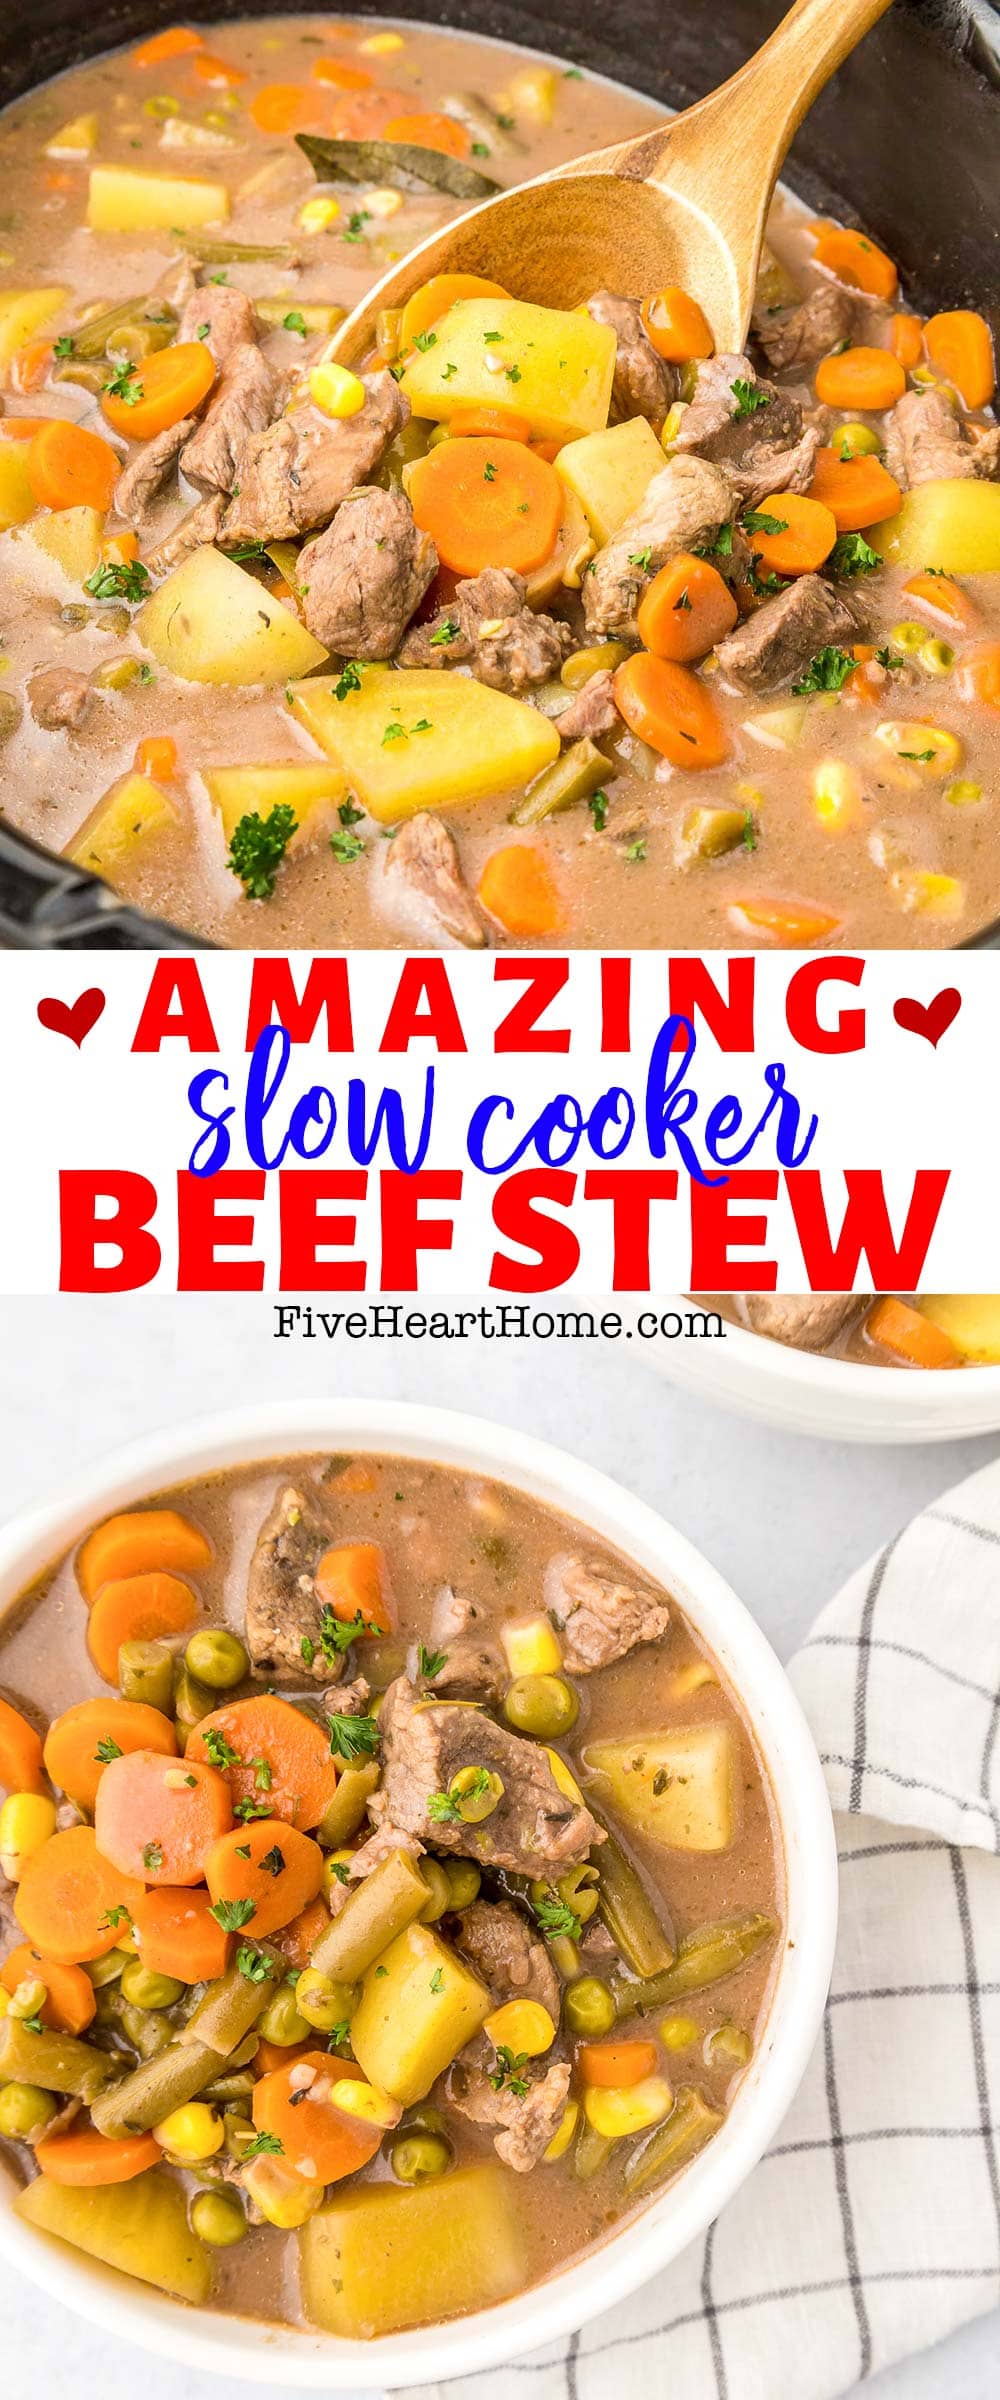 Easy Crock Pot Beef Stew ~ comforting,  delicious, and effortless to make in the slow cooker…loaded with vegetables, seasoned with herbs, and enhanced with a special ingredient for deep, savory flavor! | FiveHeartHome.com via @fivehearthome